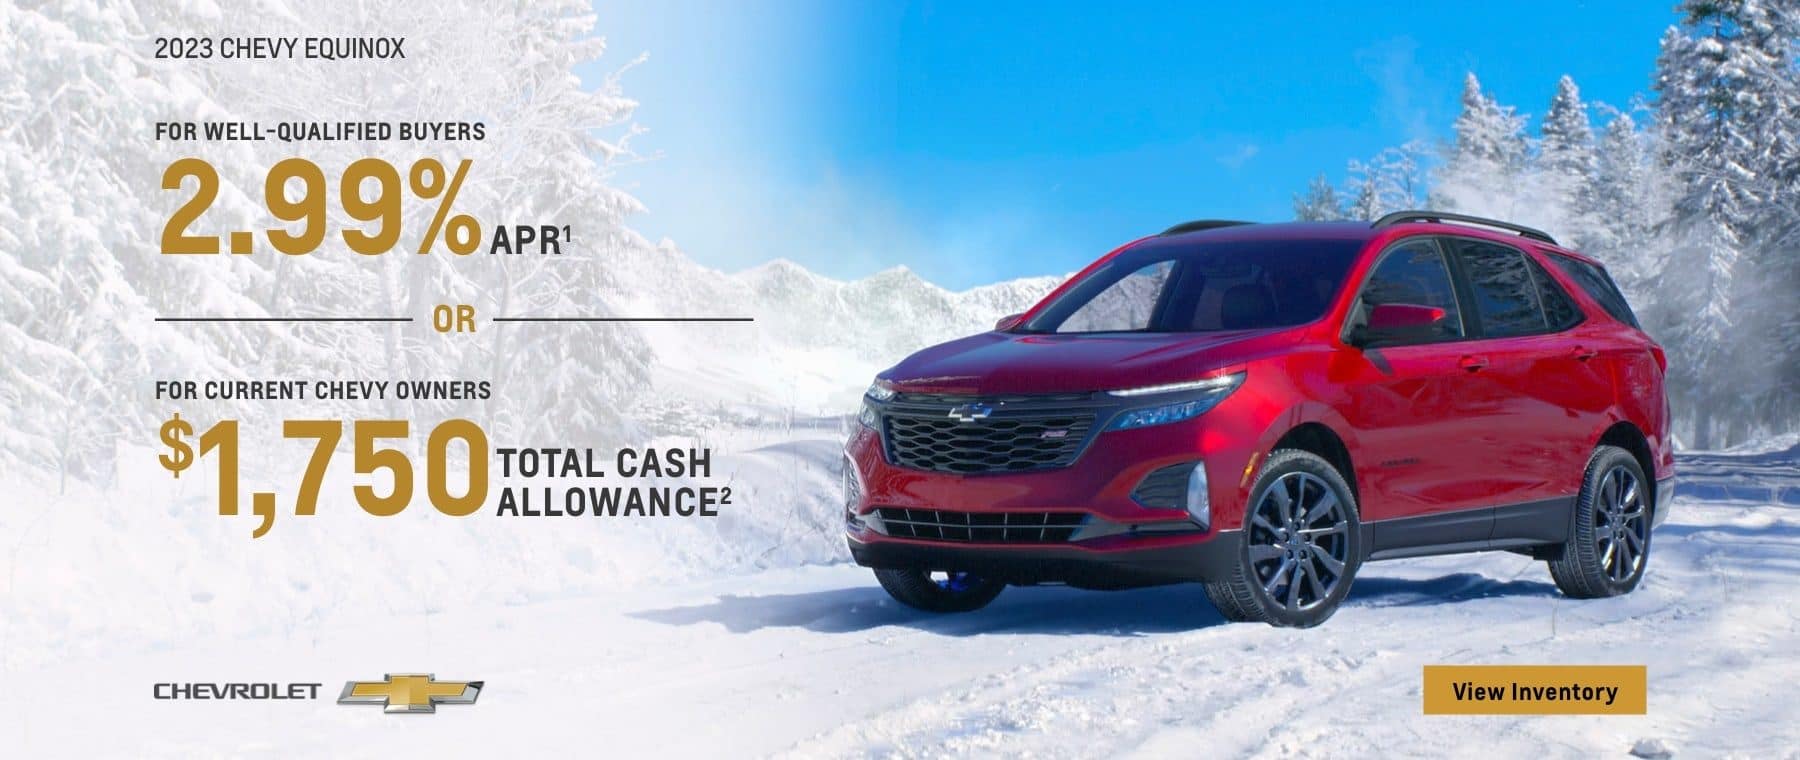 2023 Chevy Equinox. For well-qualified buyers 2.99% APR. Or, for current Chevy owners $1,750 total cash allowance.